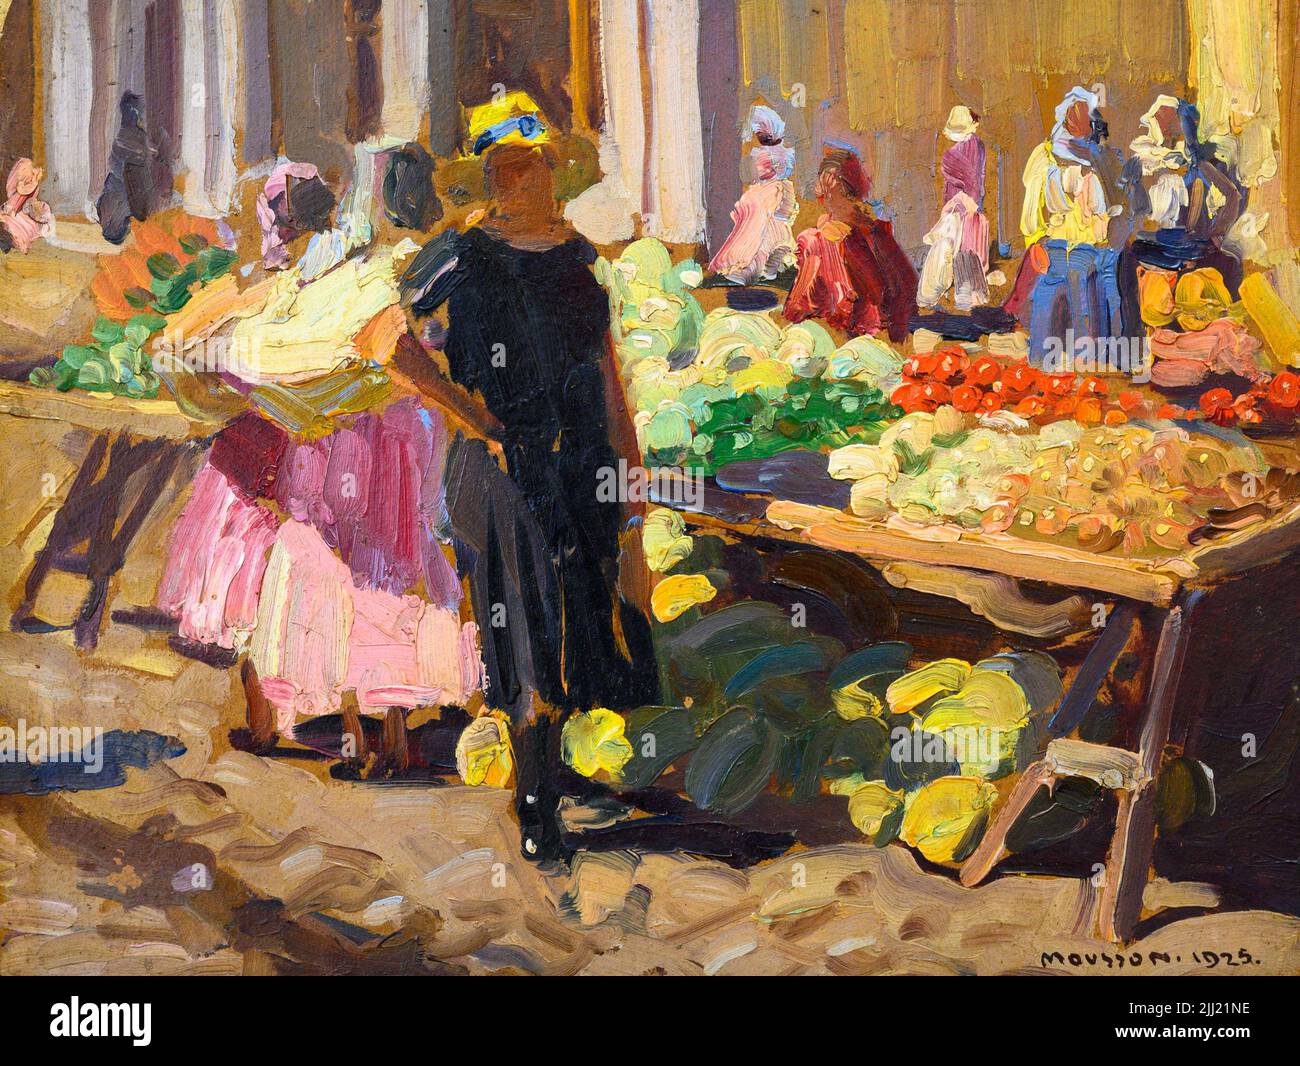 'Vegetable market' (1925) by Jozef Teodor Mousson (1887-1946). Oil on cardboard. Stock Photo